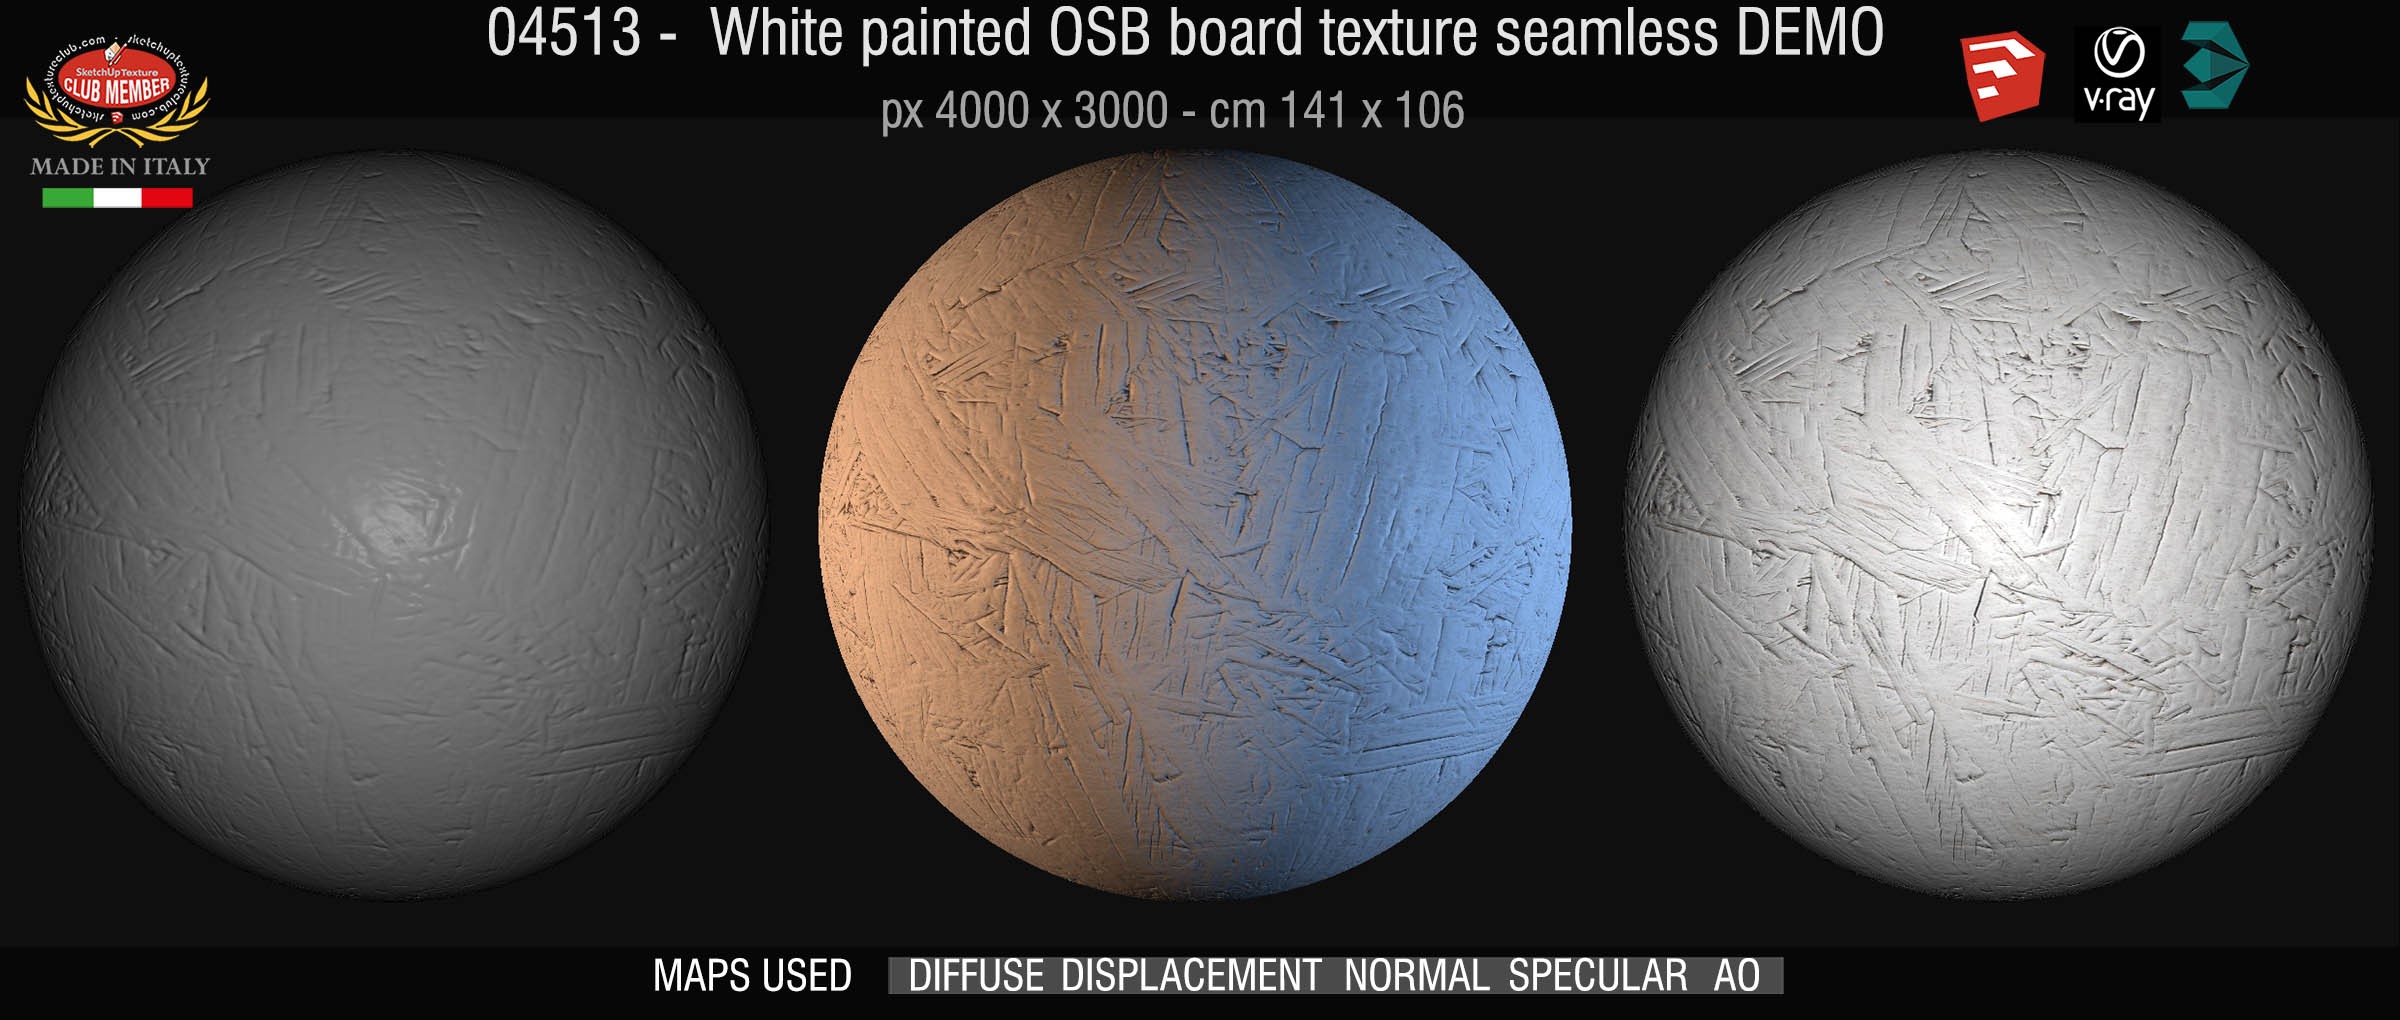 04513 White painted OSB board texture seamless + maps DEMO